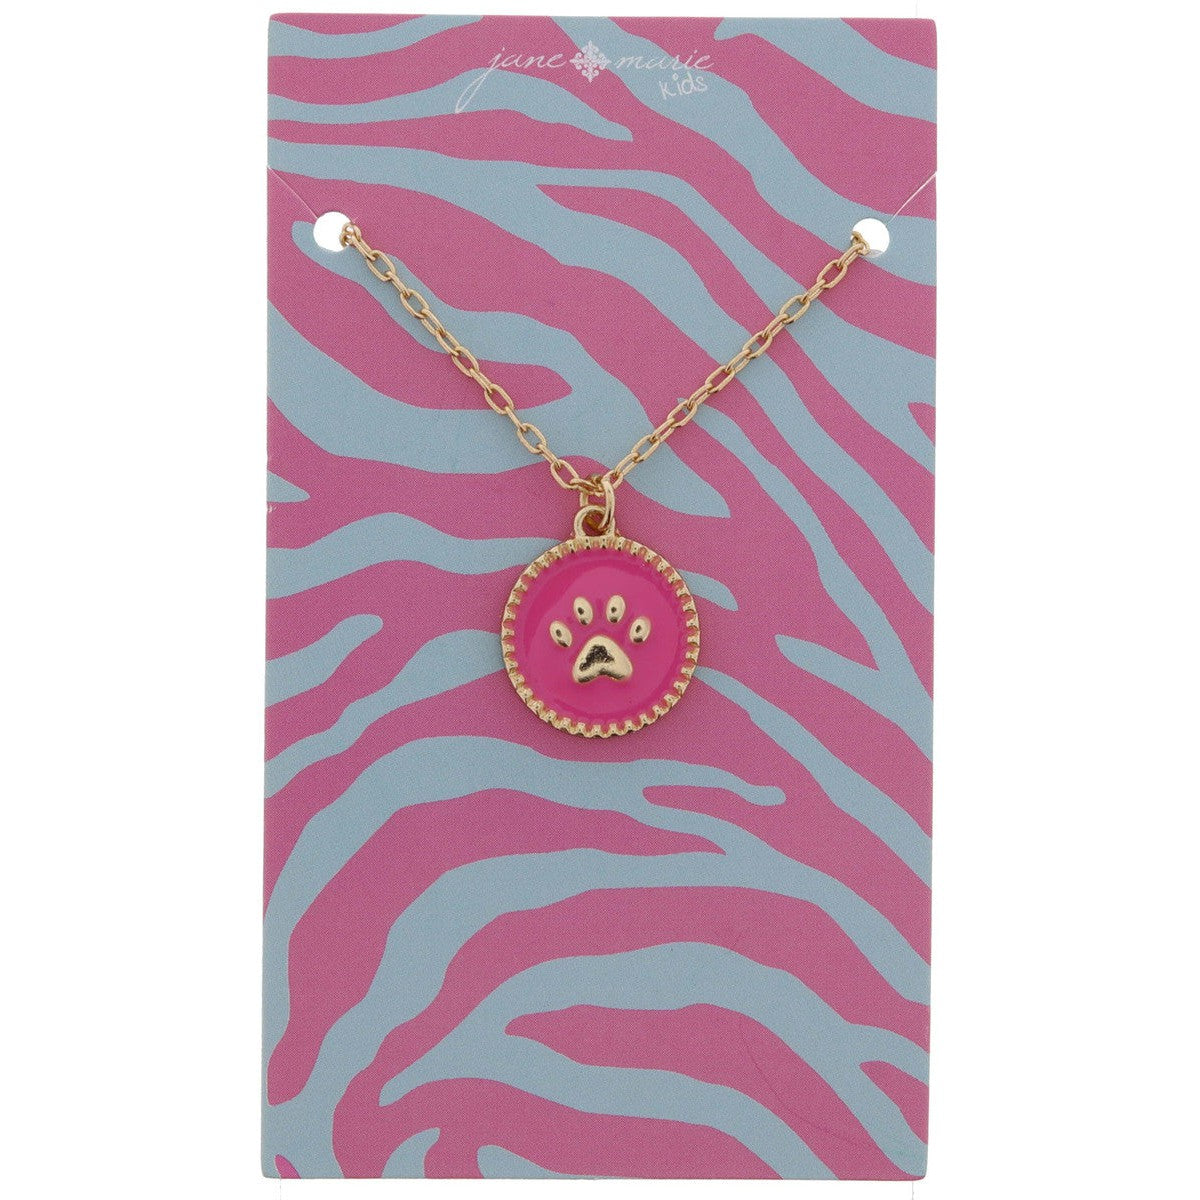 Jane Marie Kids Pink Enamel Disc With Center Gold Paw Print Necklace-JANE MARIE-Little Giant Kidz